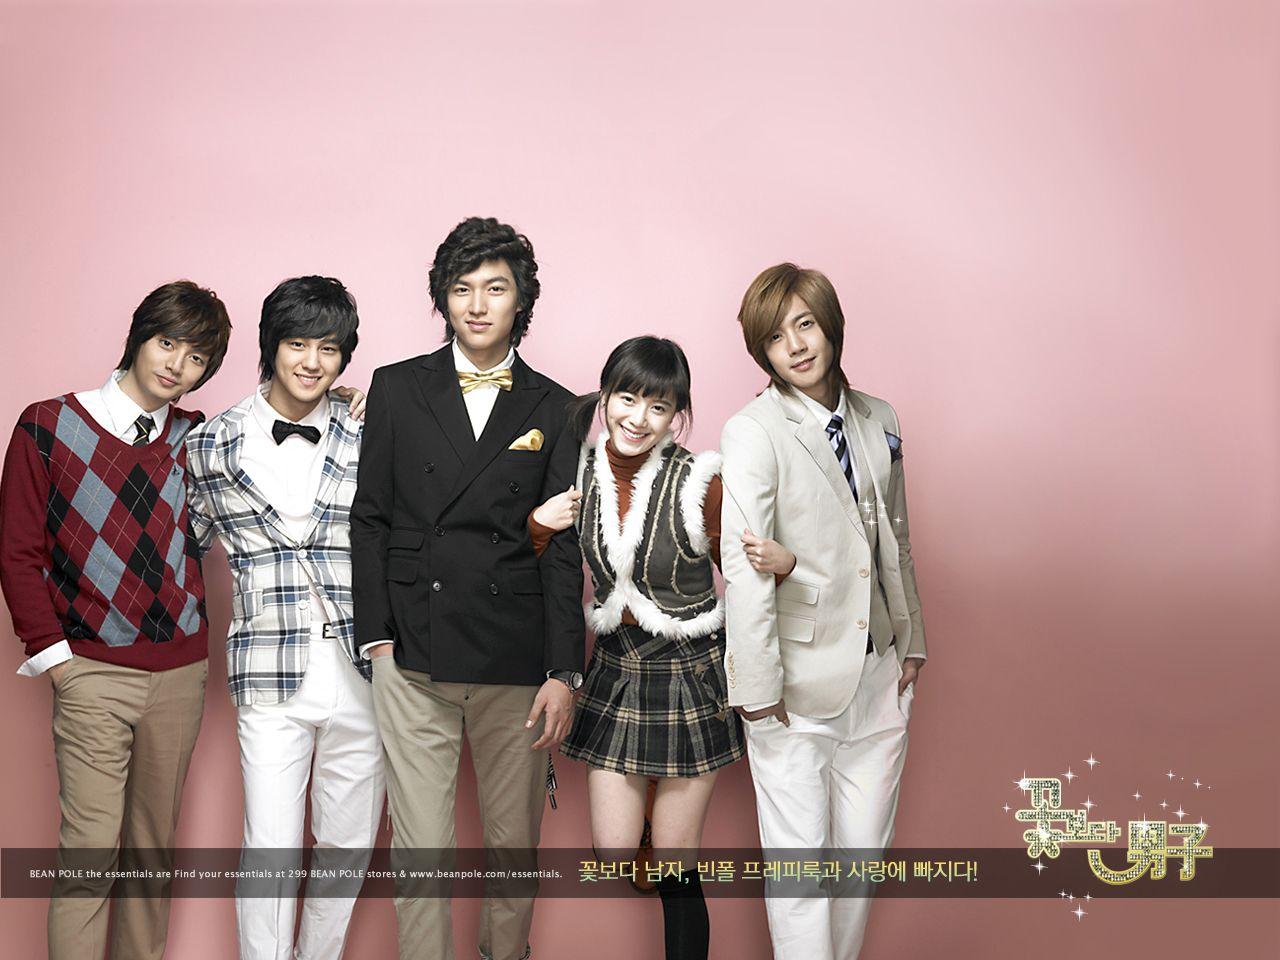 Image result for boys before flowers